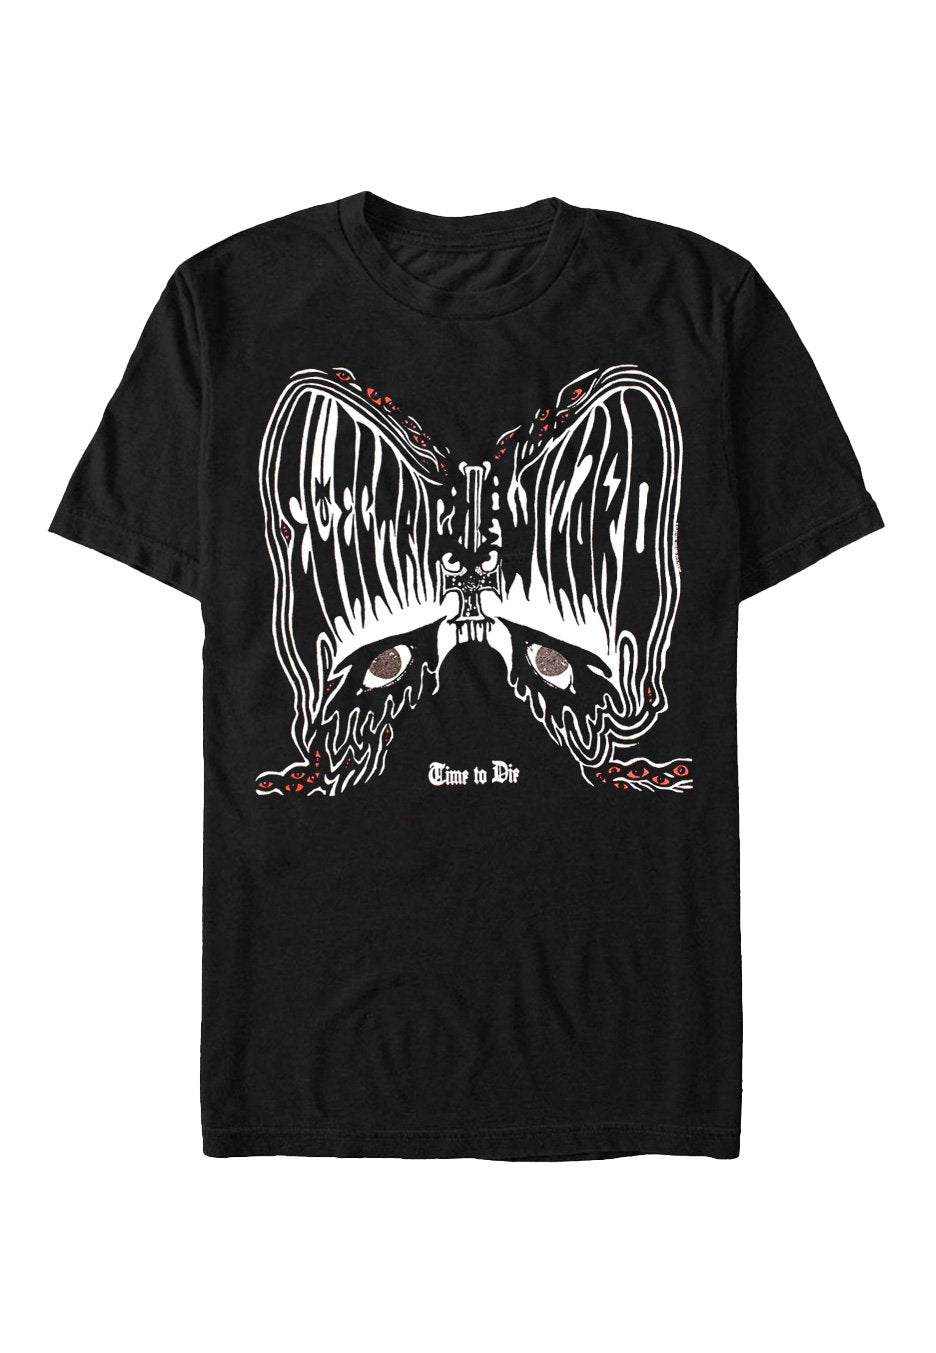 Electric Wizard - Time To Die - T-Shirt